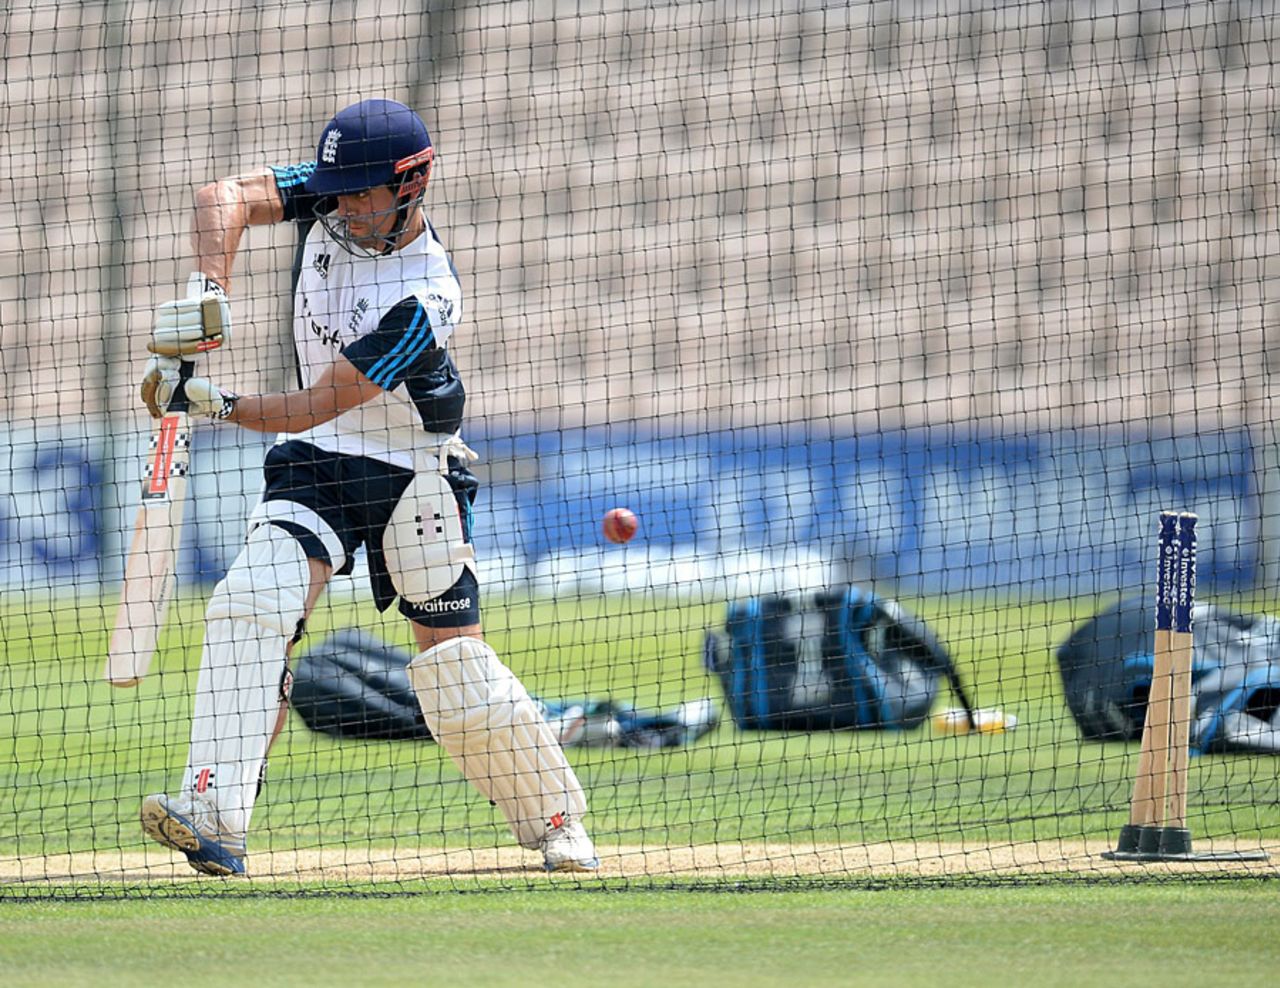 Alastair Cook works in the nets, Ageas Bowl, July 25, 2014